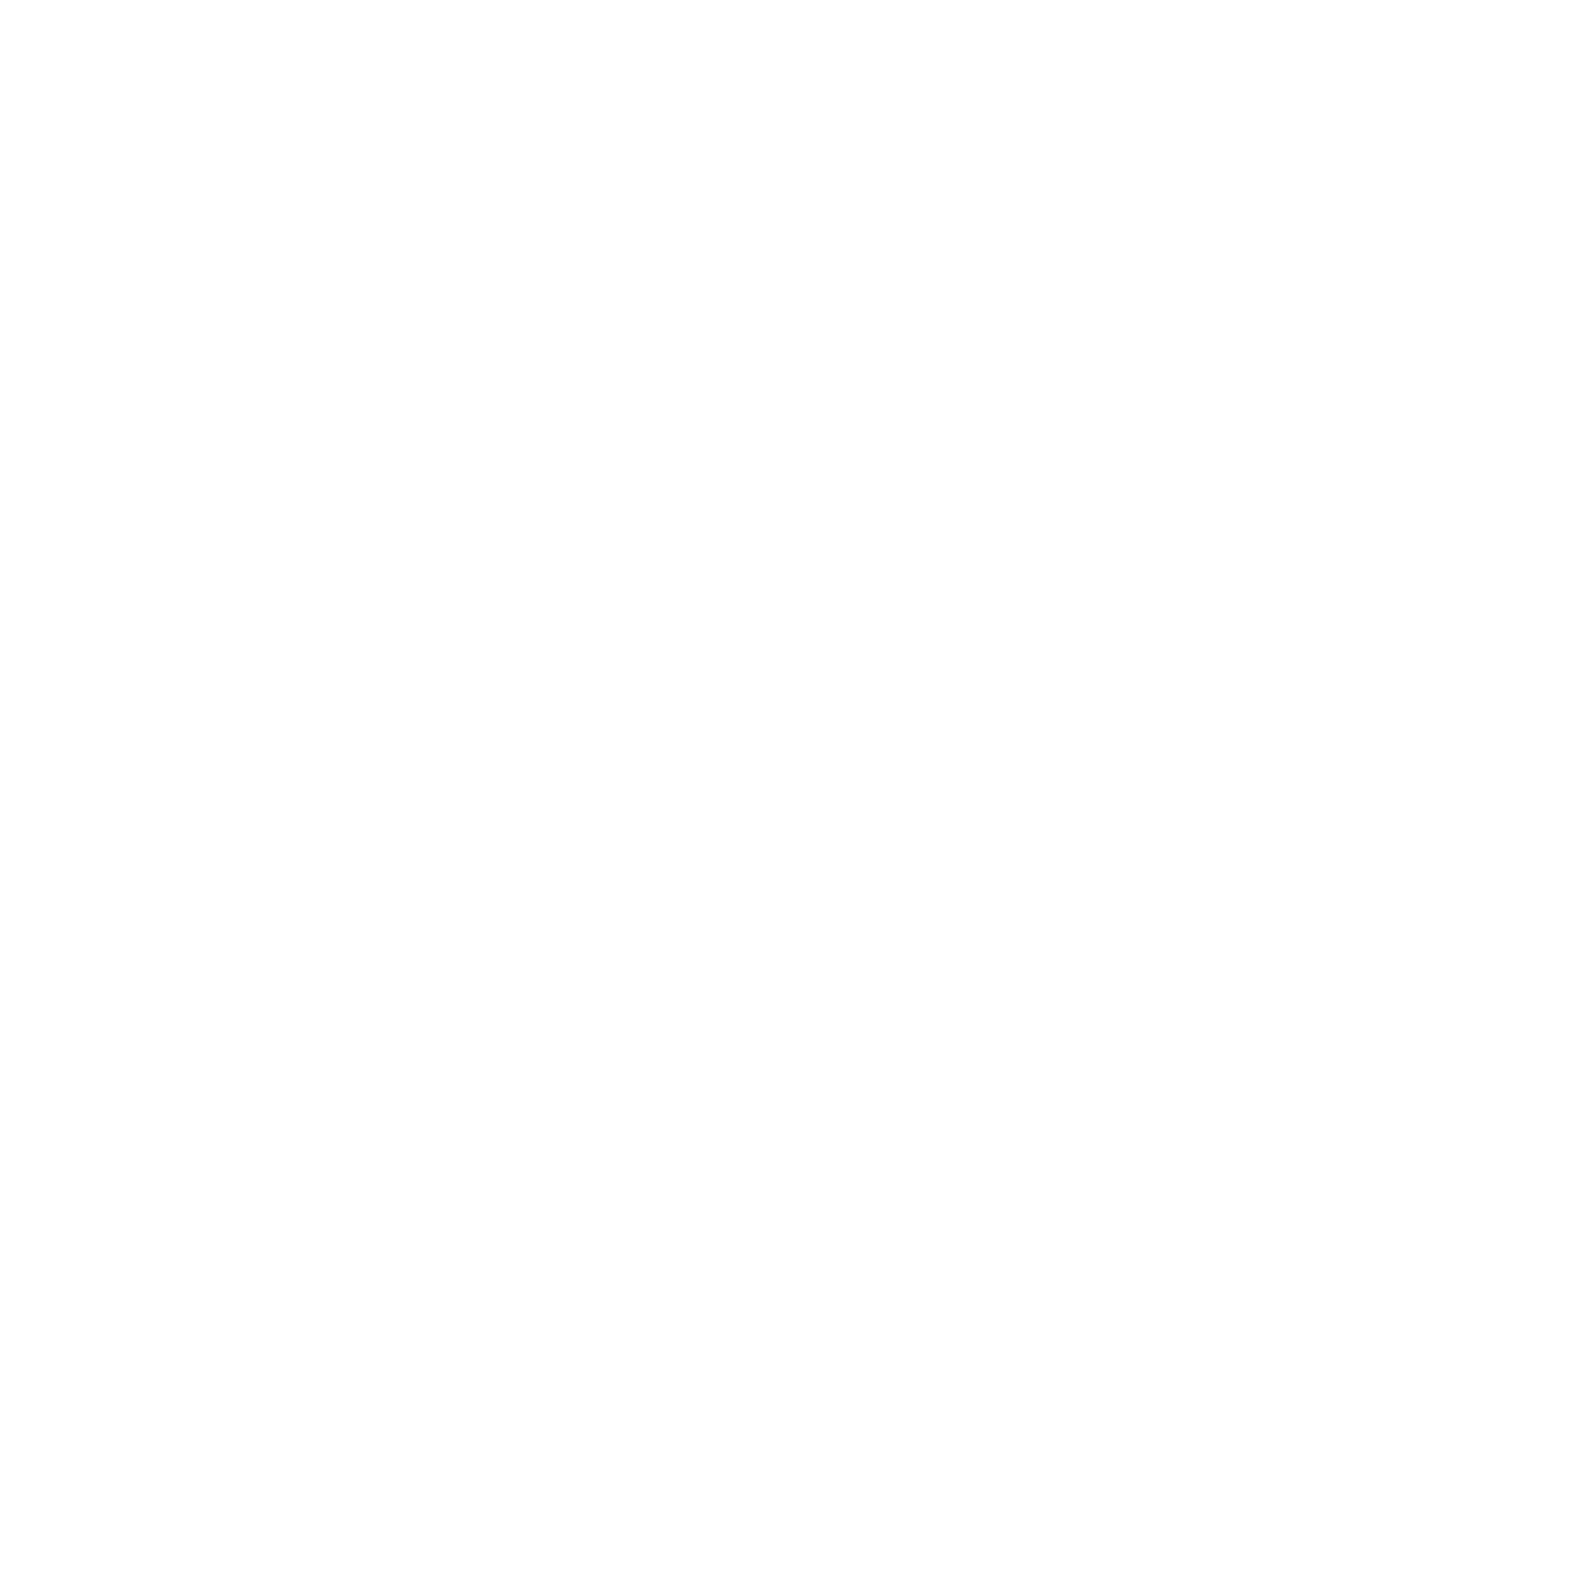 Coloring your time and space